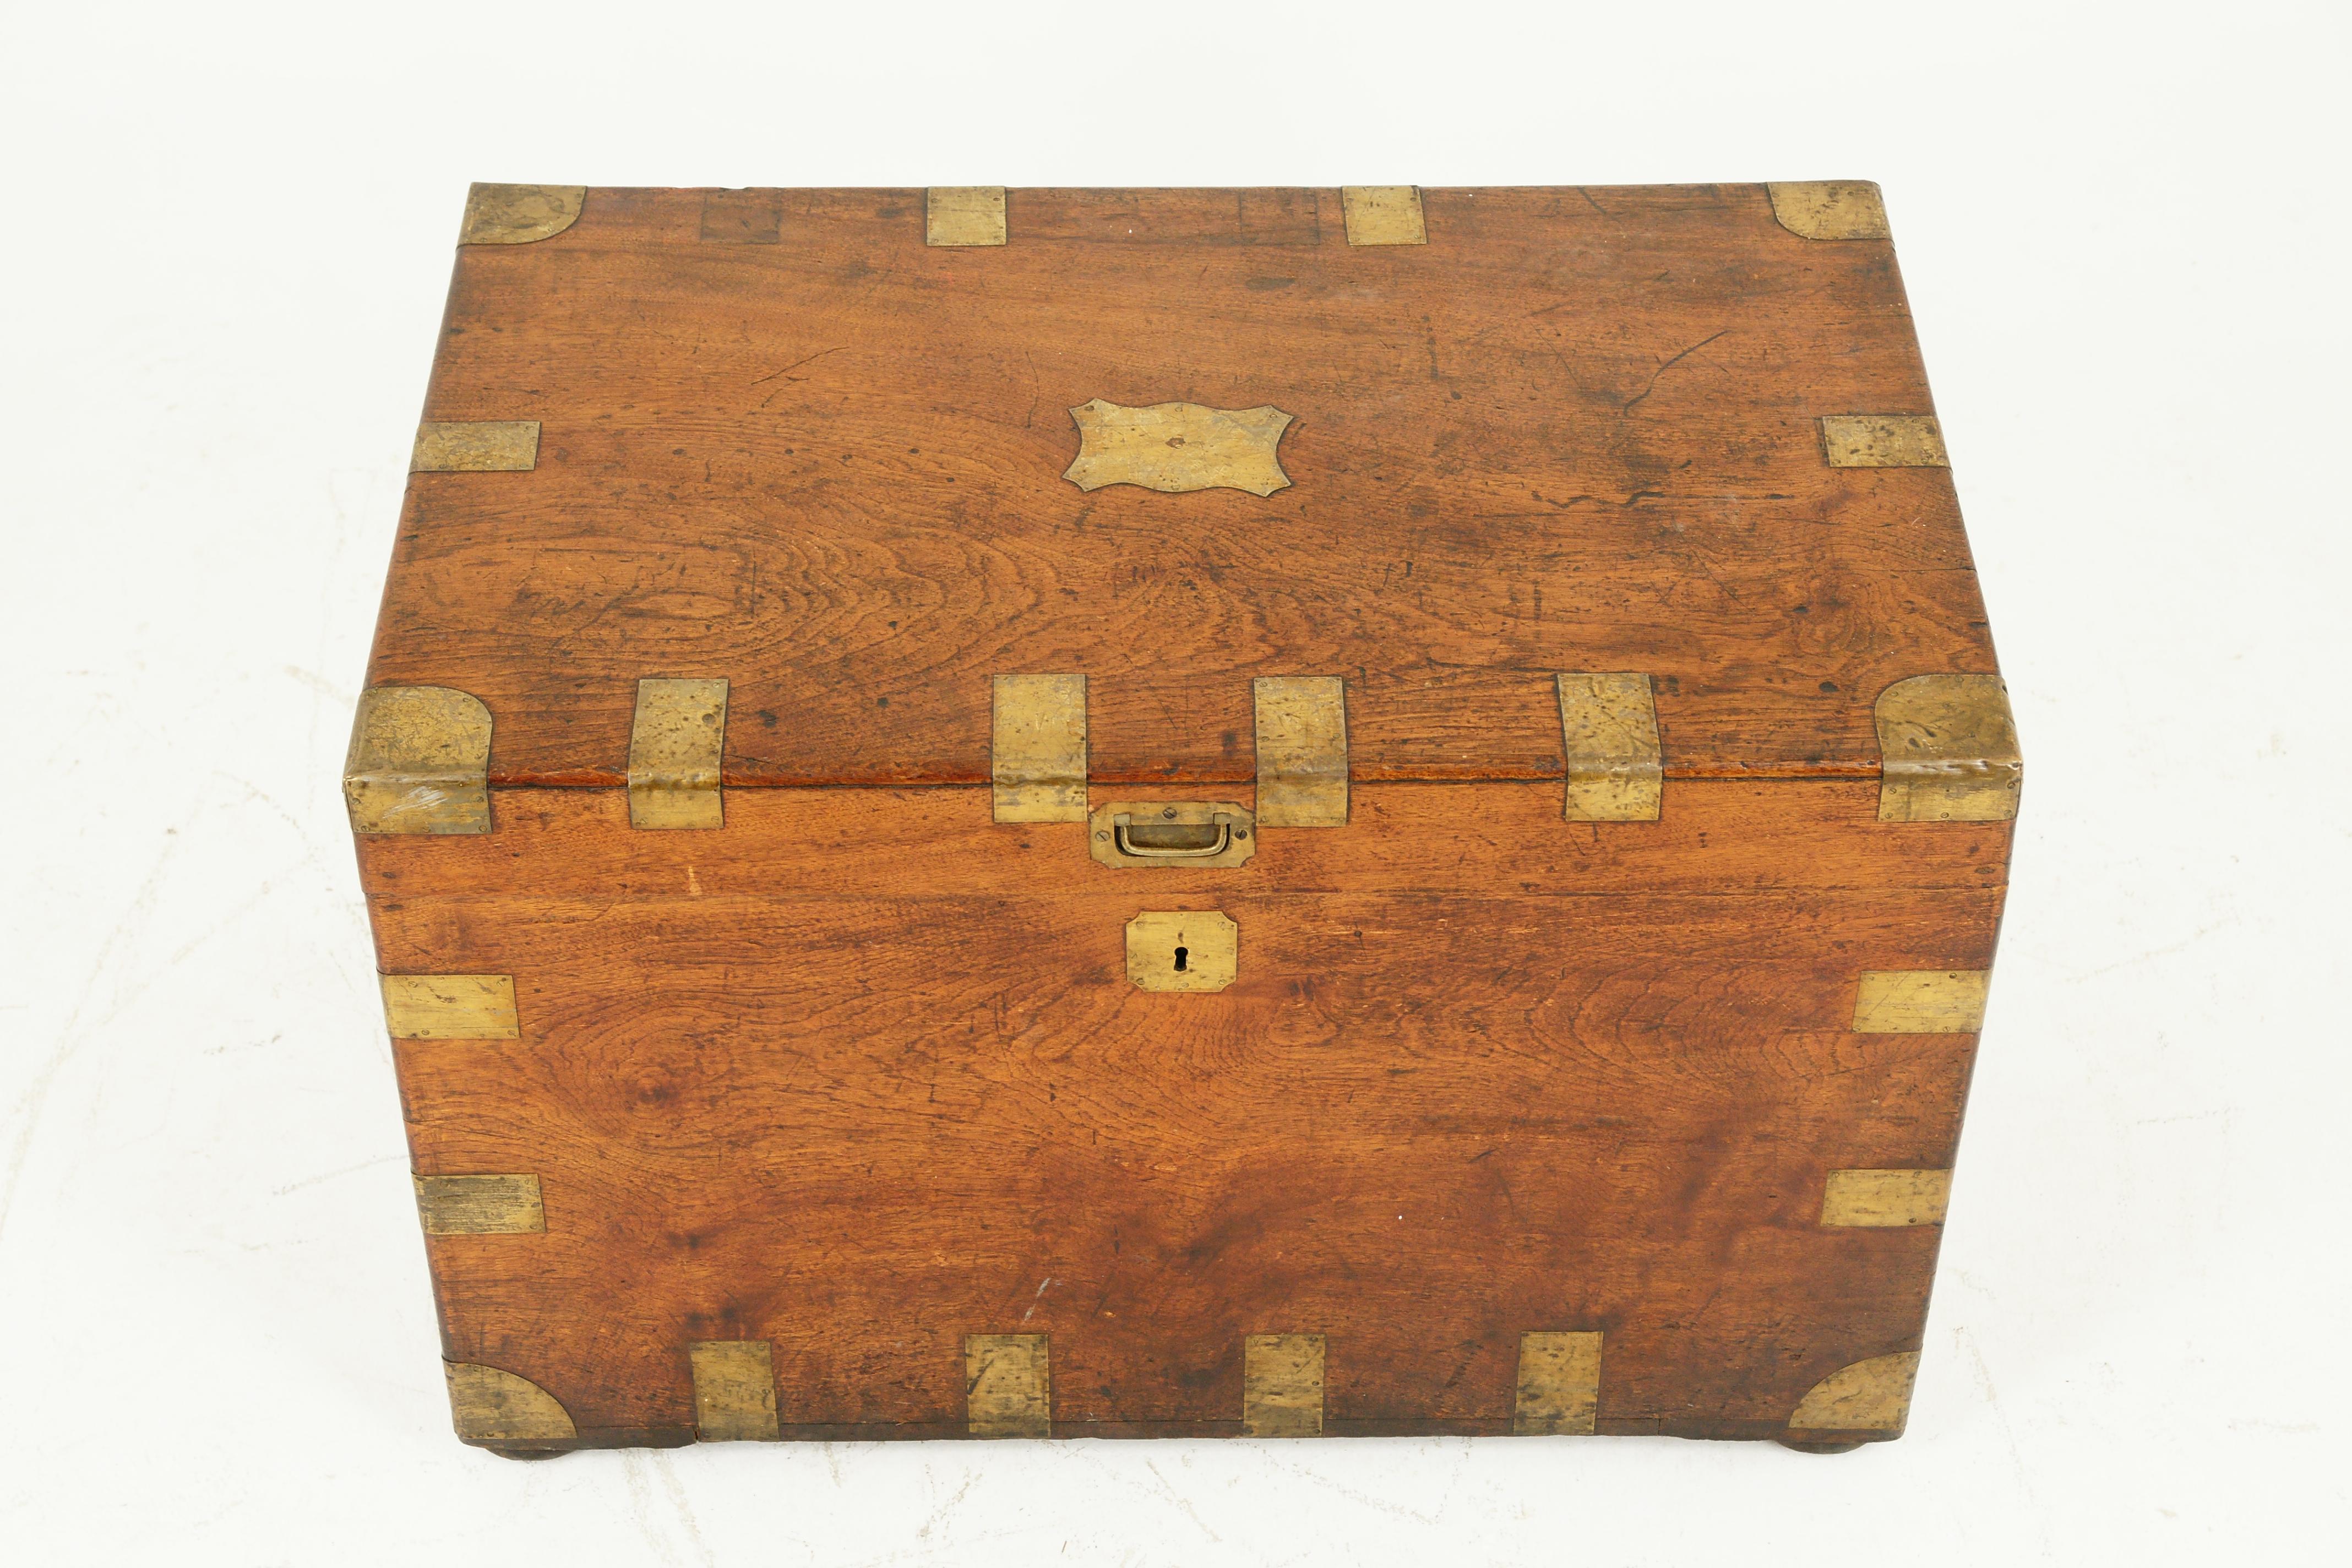 Antique Victorian military camphor wood travelling trunk, chest, fitted interior, Scotland 1880, B1950

Scotland, 1880
Solid camphor wood
All original
Rectangular top with brass trim (one missing)
Plain brown plate to the top
Heavy shaped